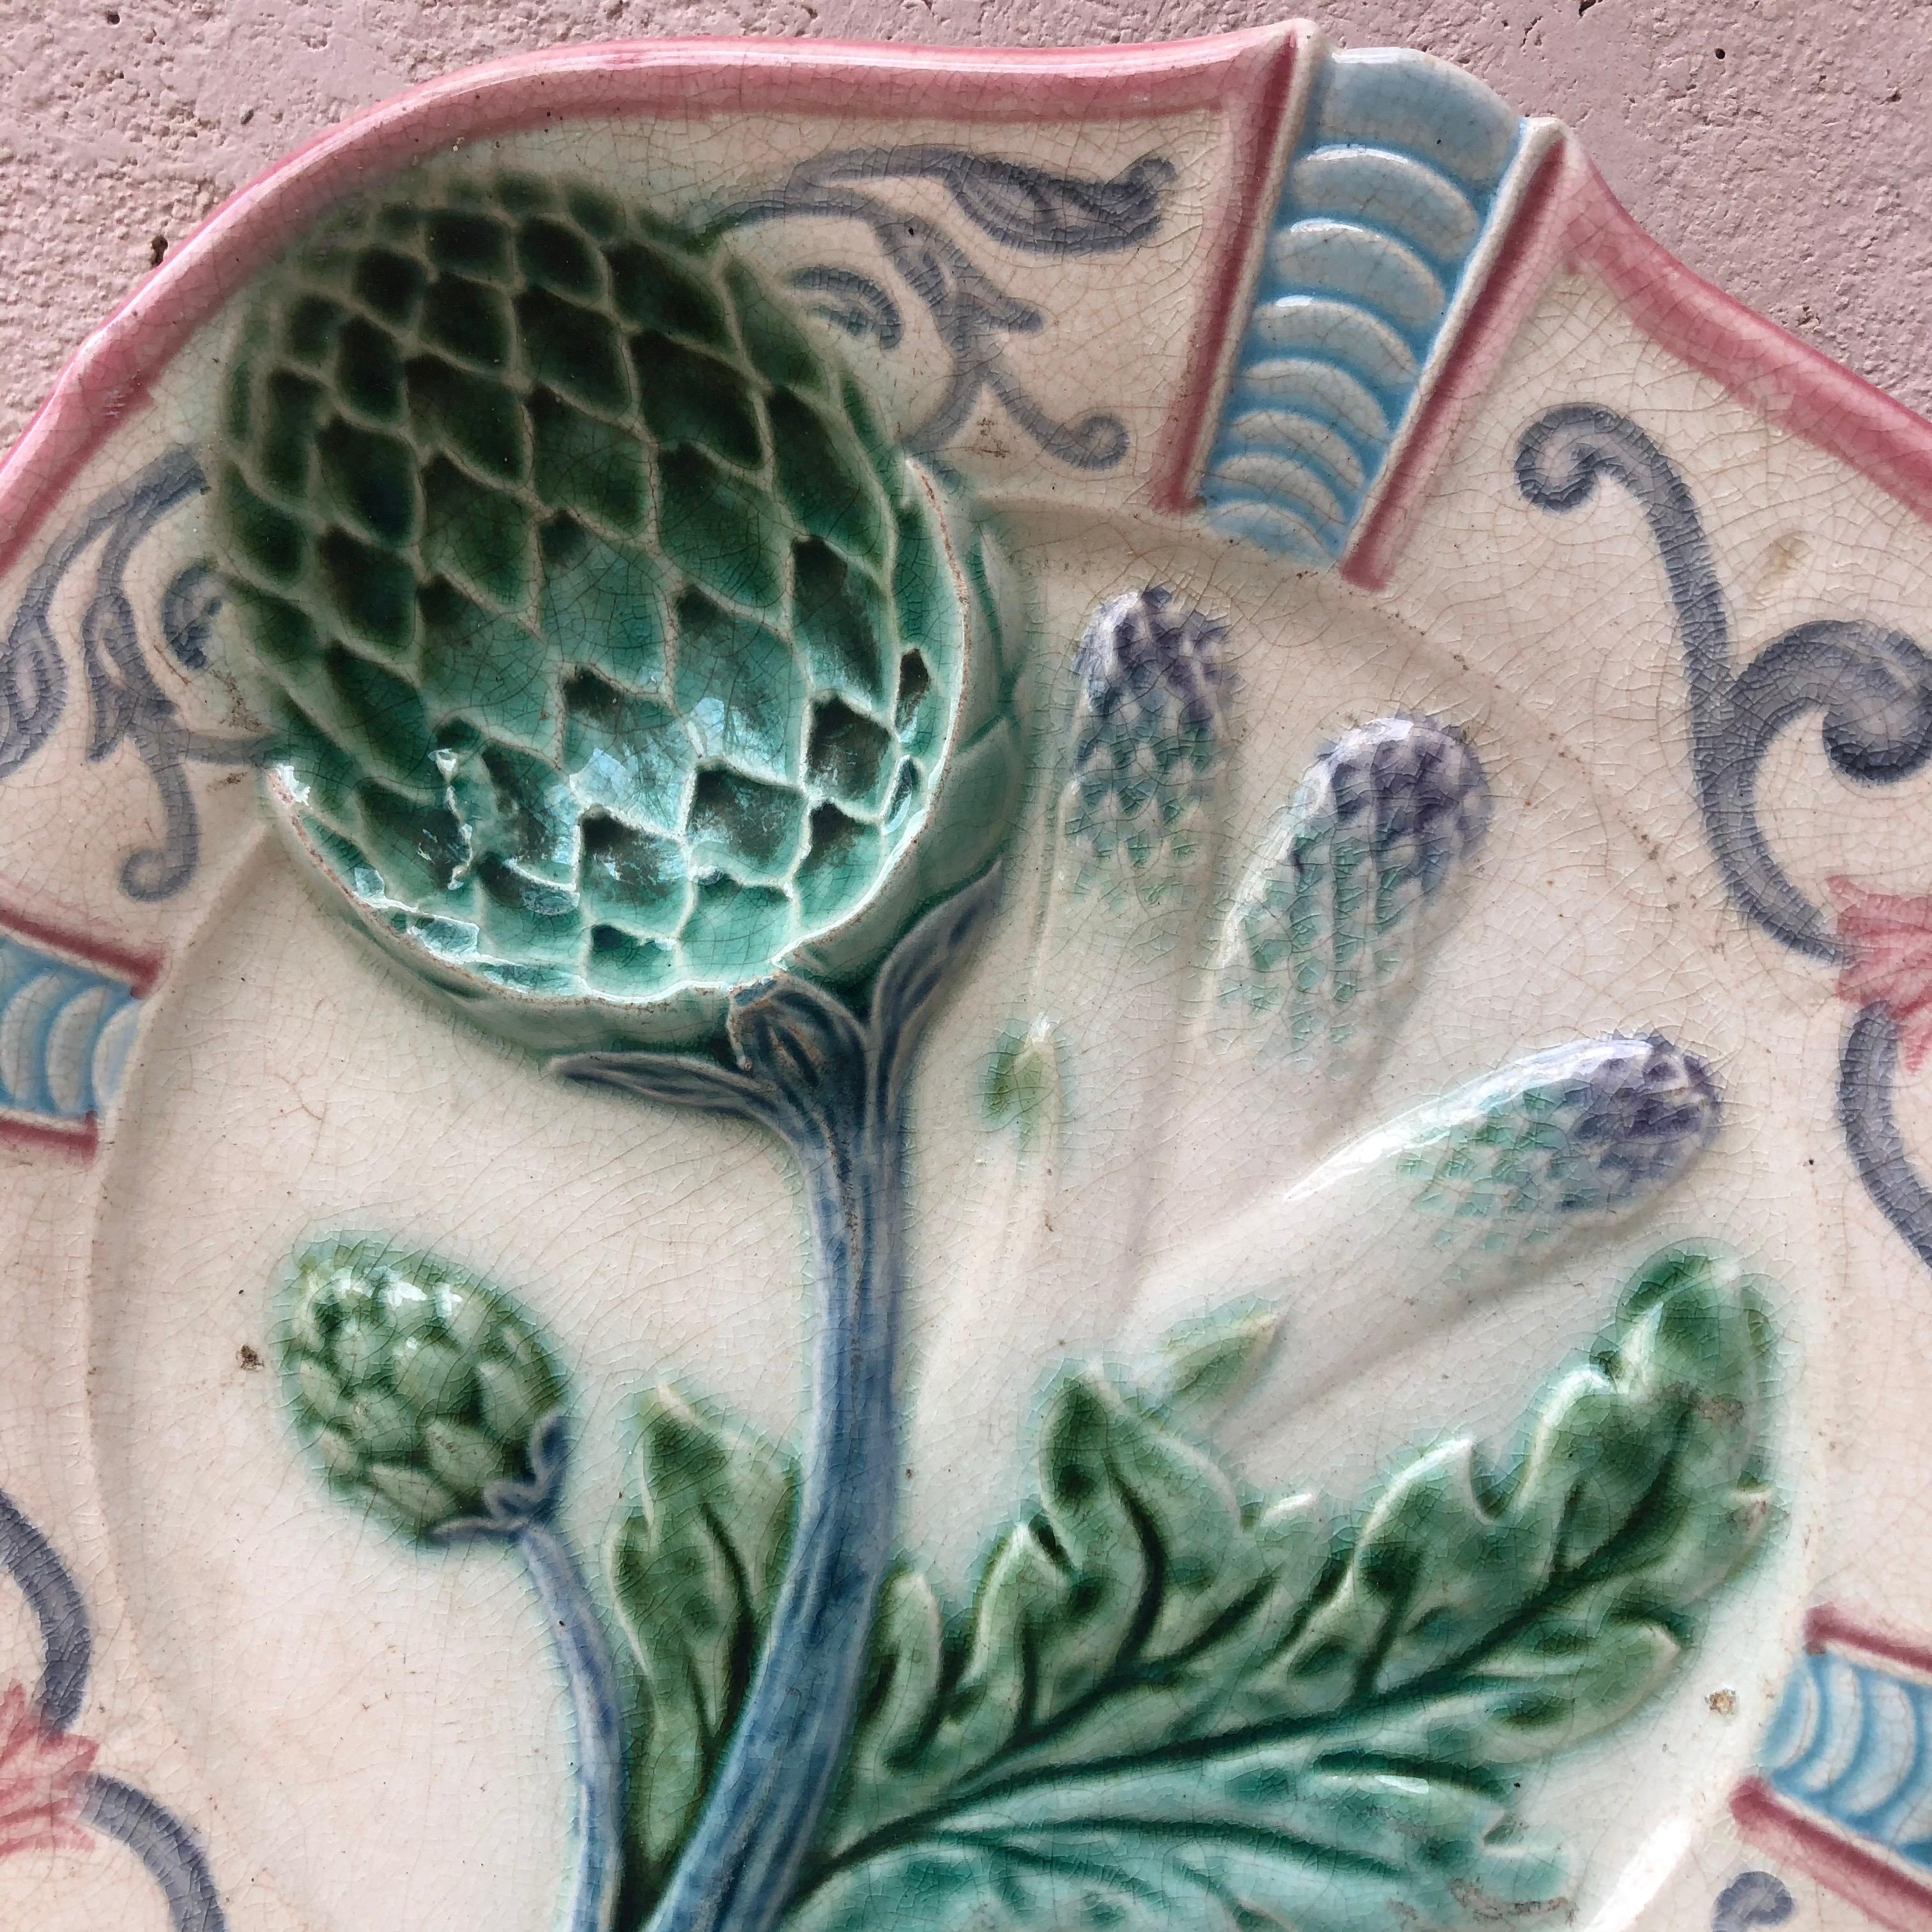 French Majolica asparagus plate fives Lille, circa 1890.
Decorated with an artichoke and a mask with leaves.